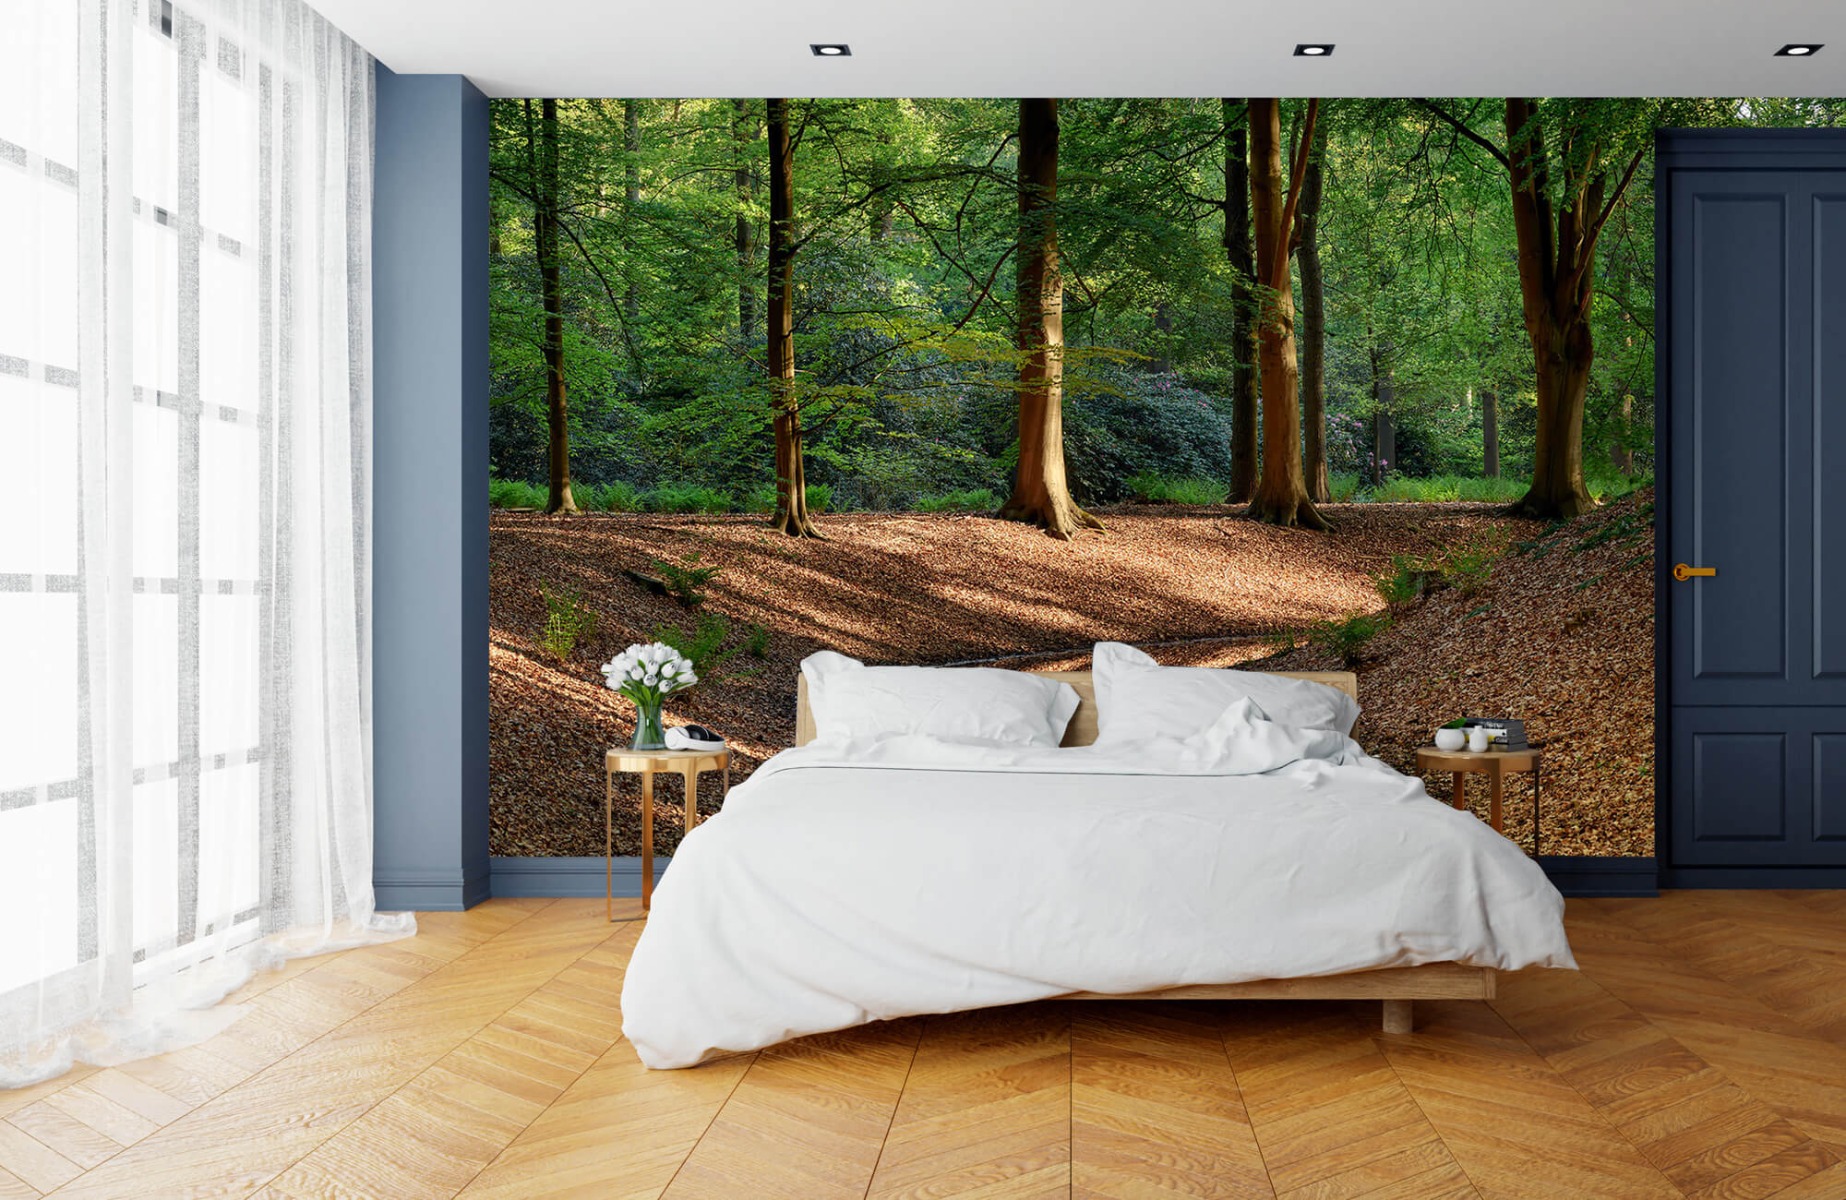 Forest wallpaper - Brooklet in the forest  - Bedroom 16